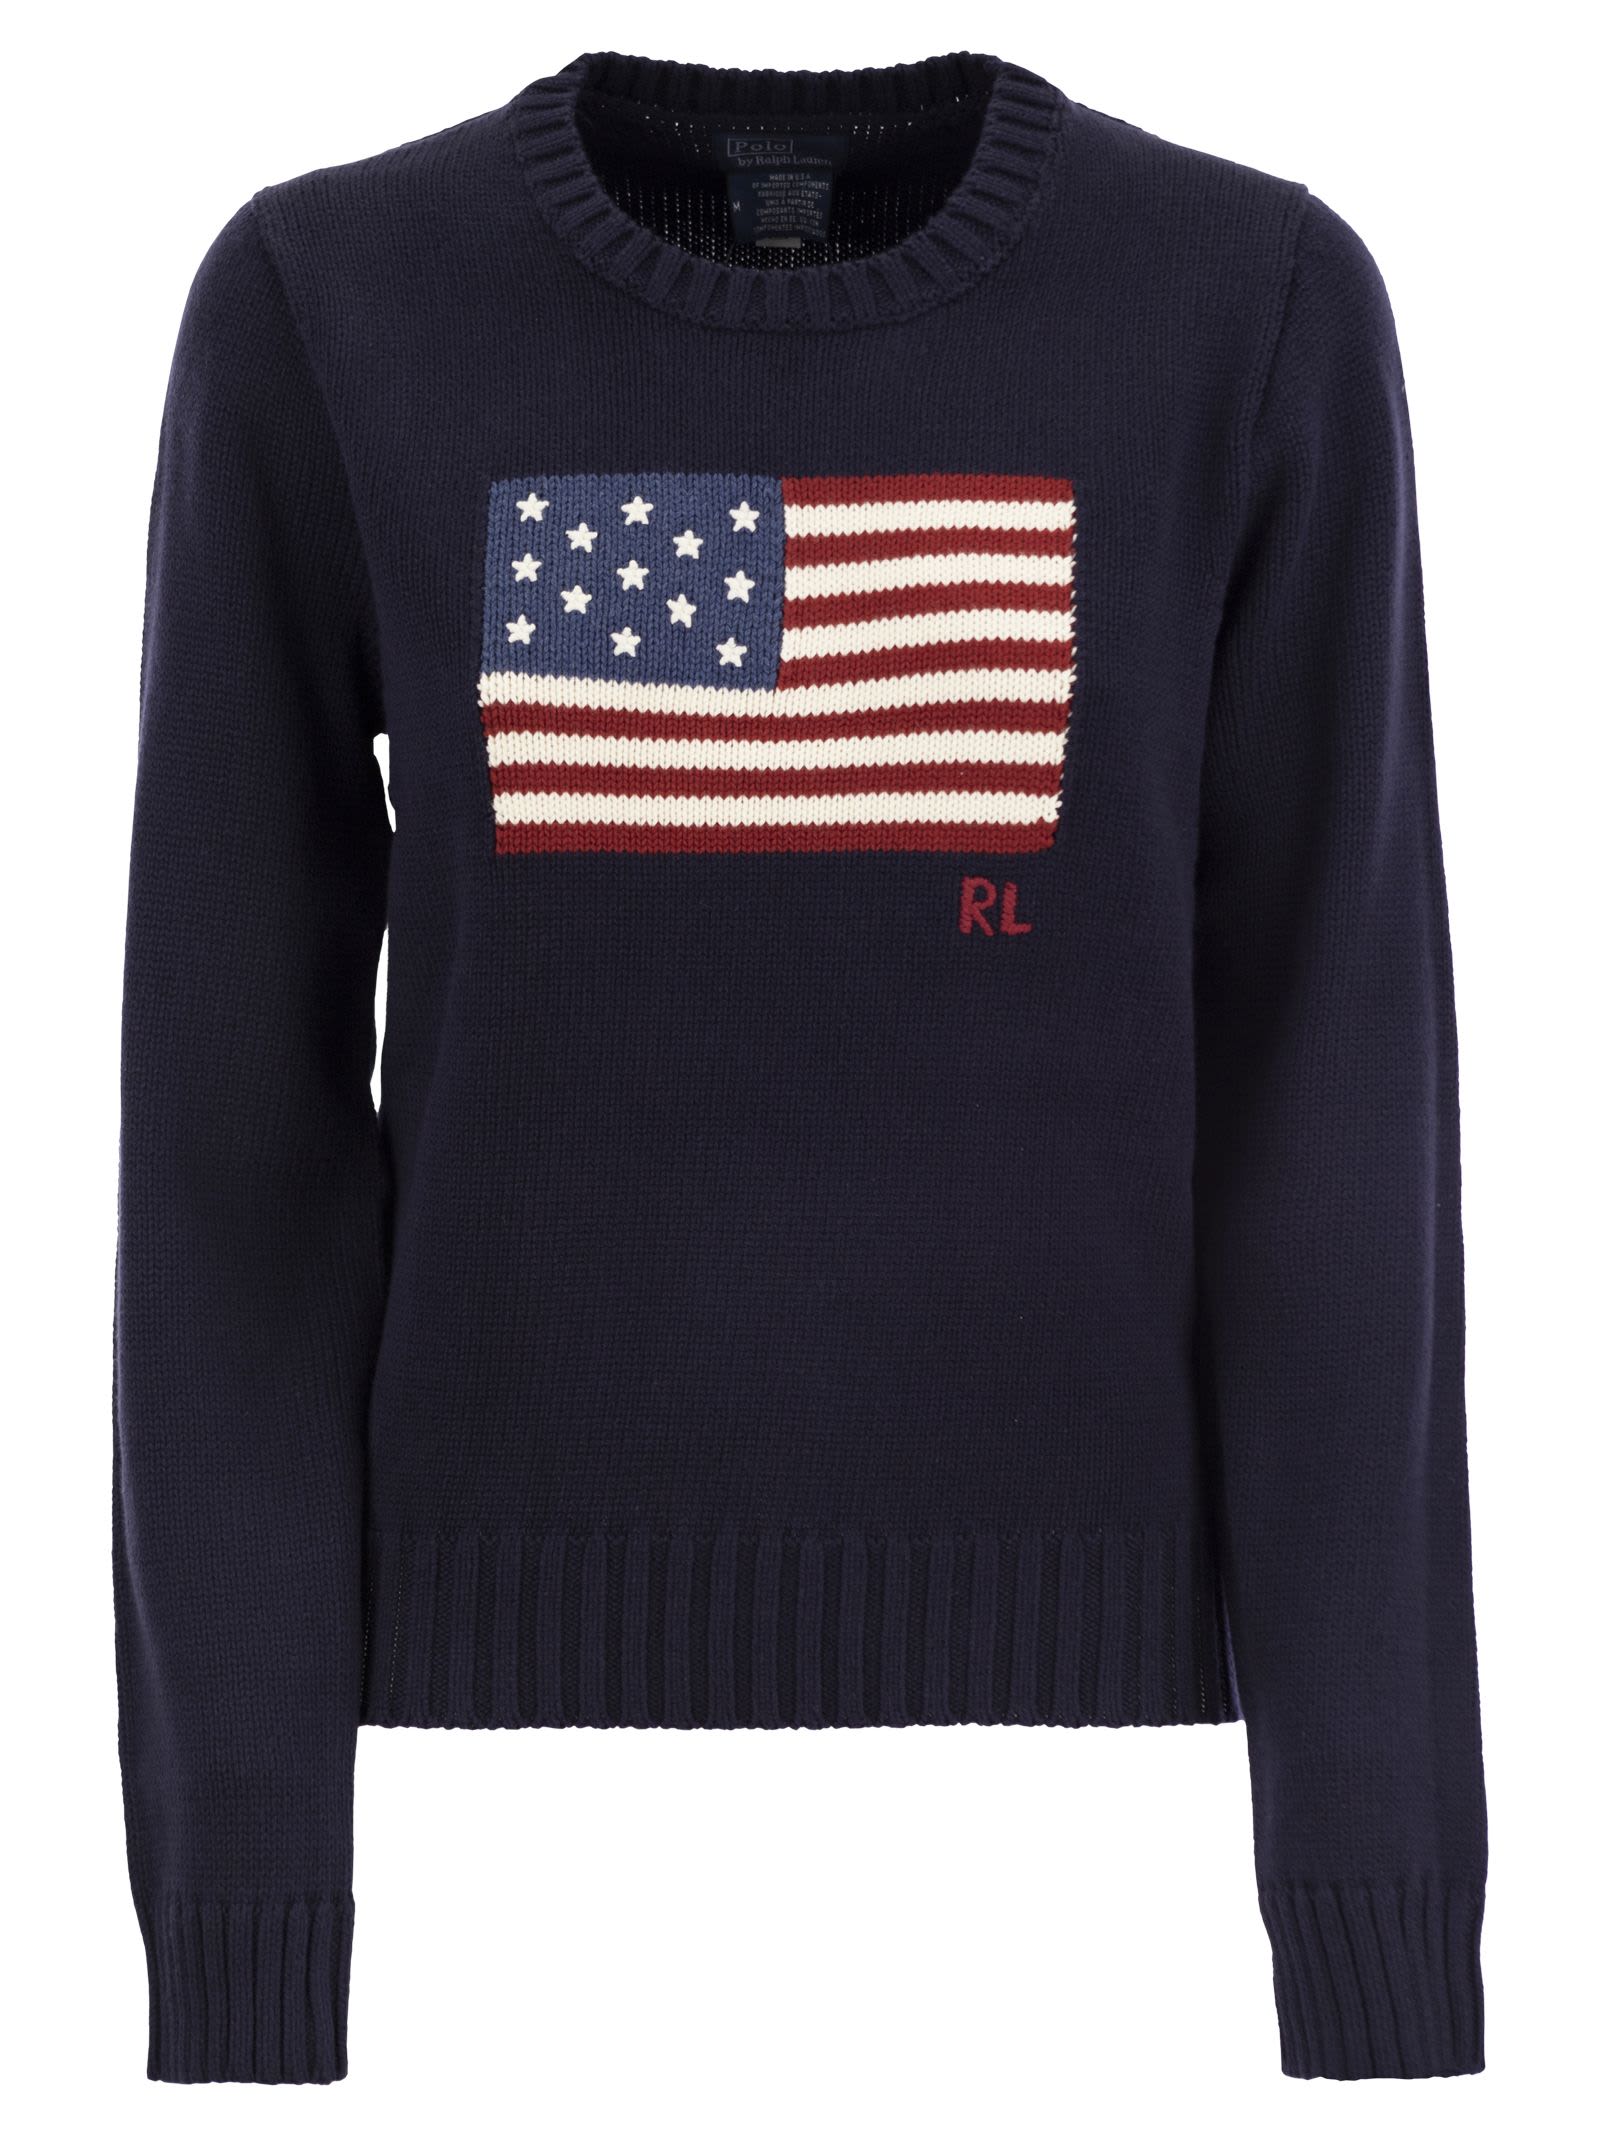 POLO RALPH LAUREN COTTON JERSEY WITH FLAG